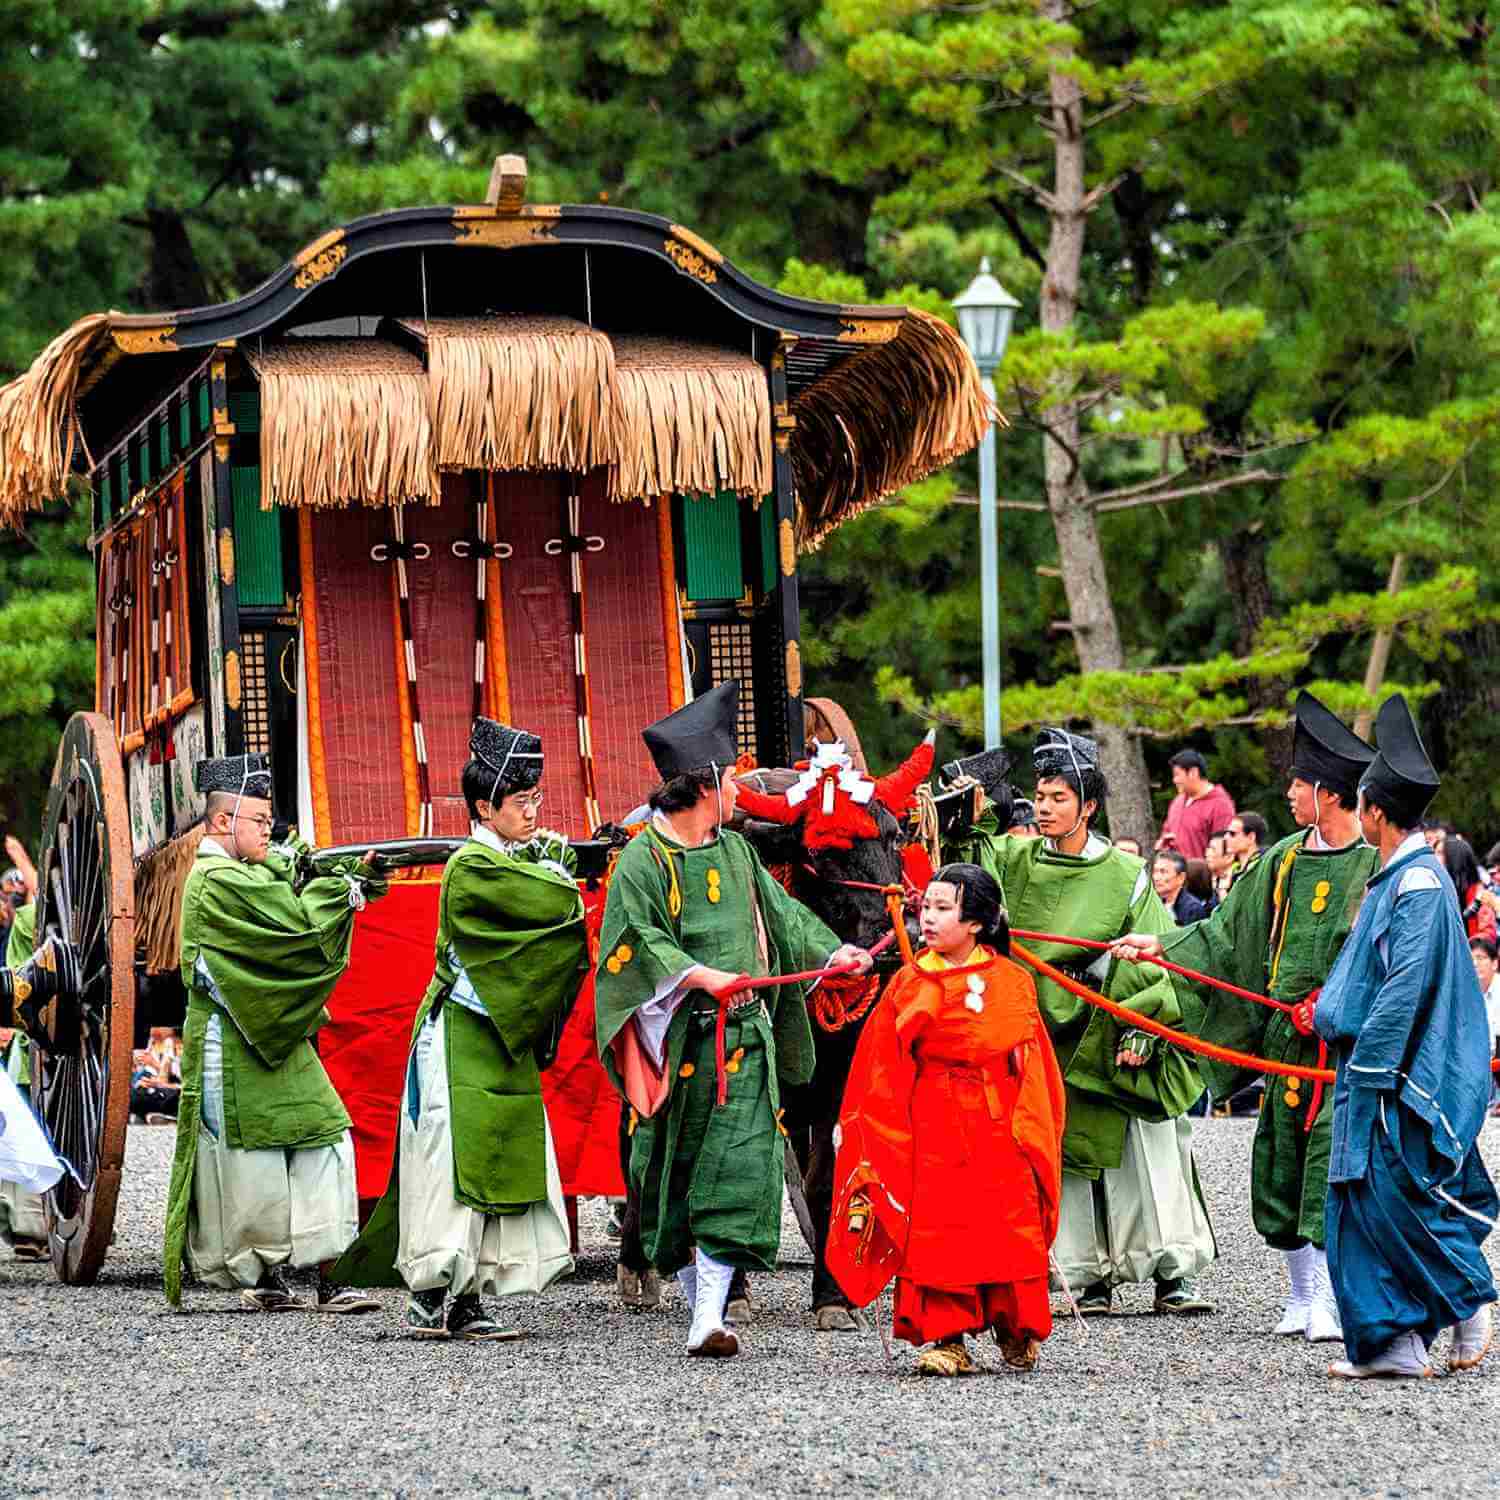 The Jidai Matsuri Festival is a traditional Japanese festival held annually on October 22 in Kyoto, Japan = Shutterstock 1